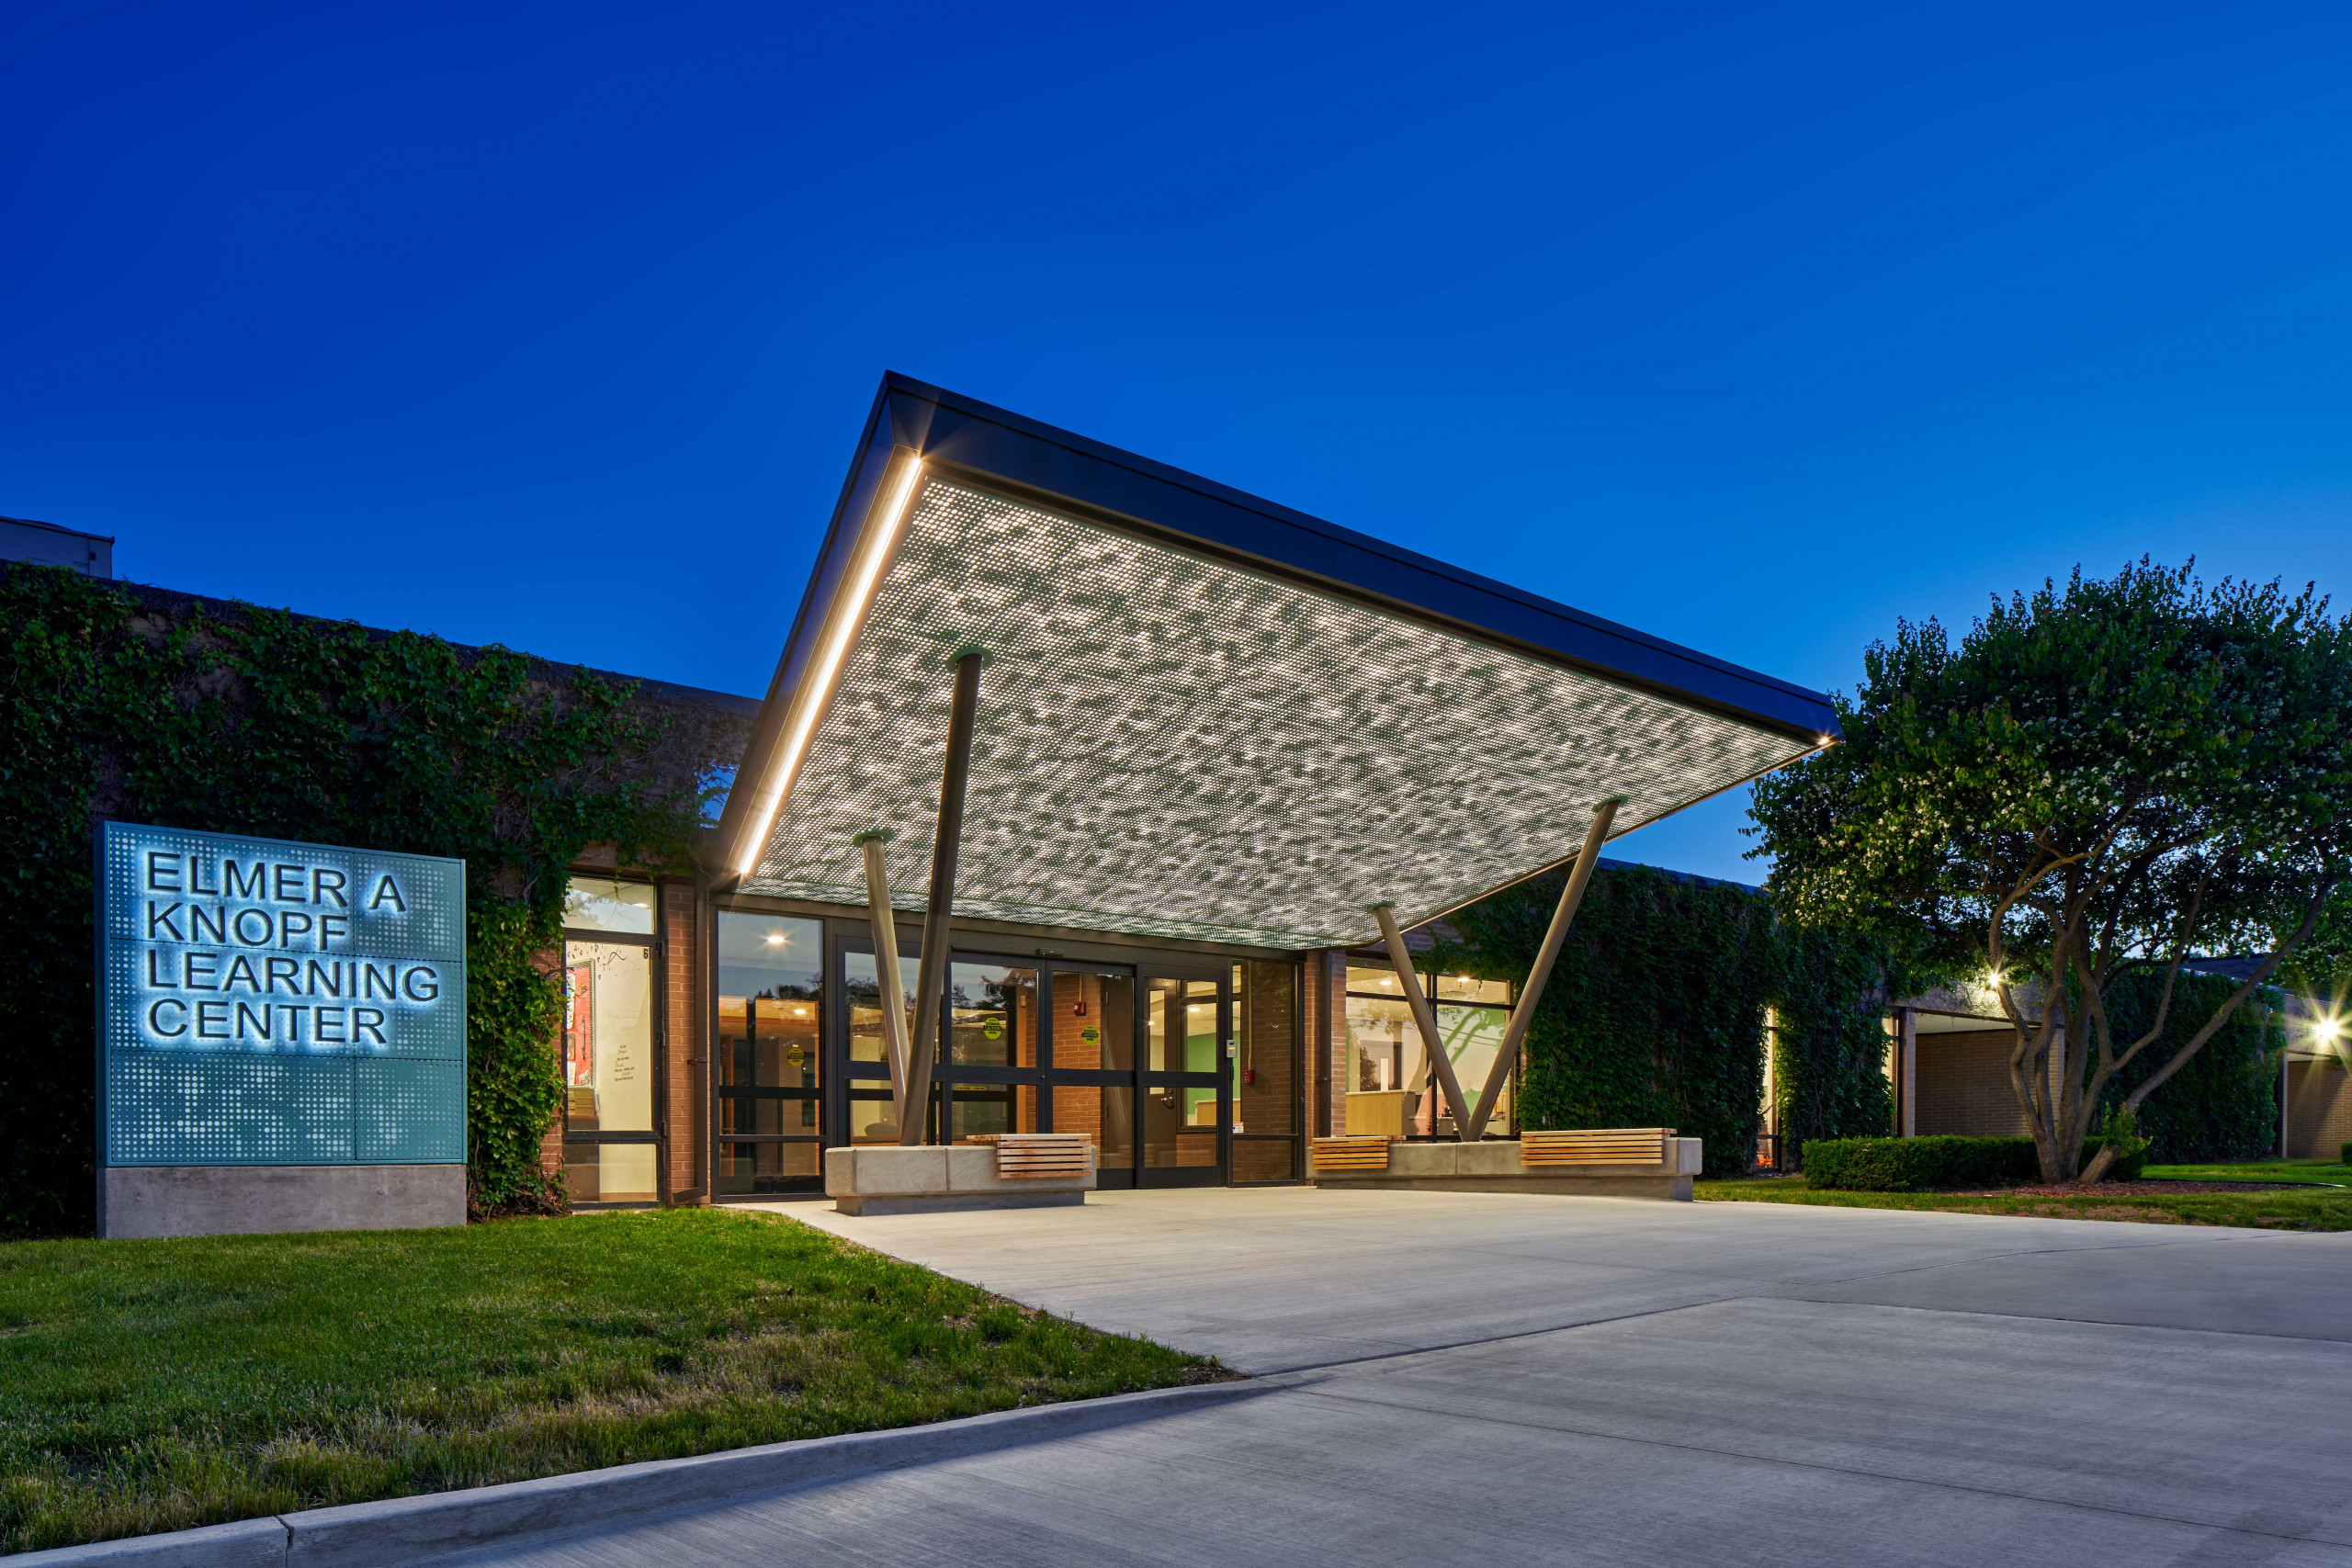 The entryway to the Elmer Knopf Learning Center features Arktura’s glimmering panels.